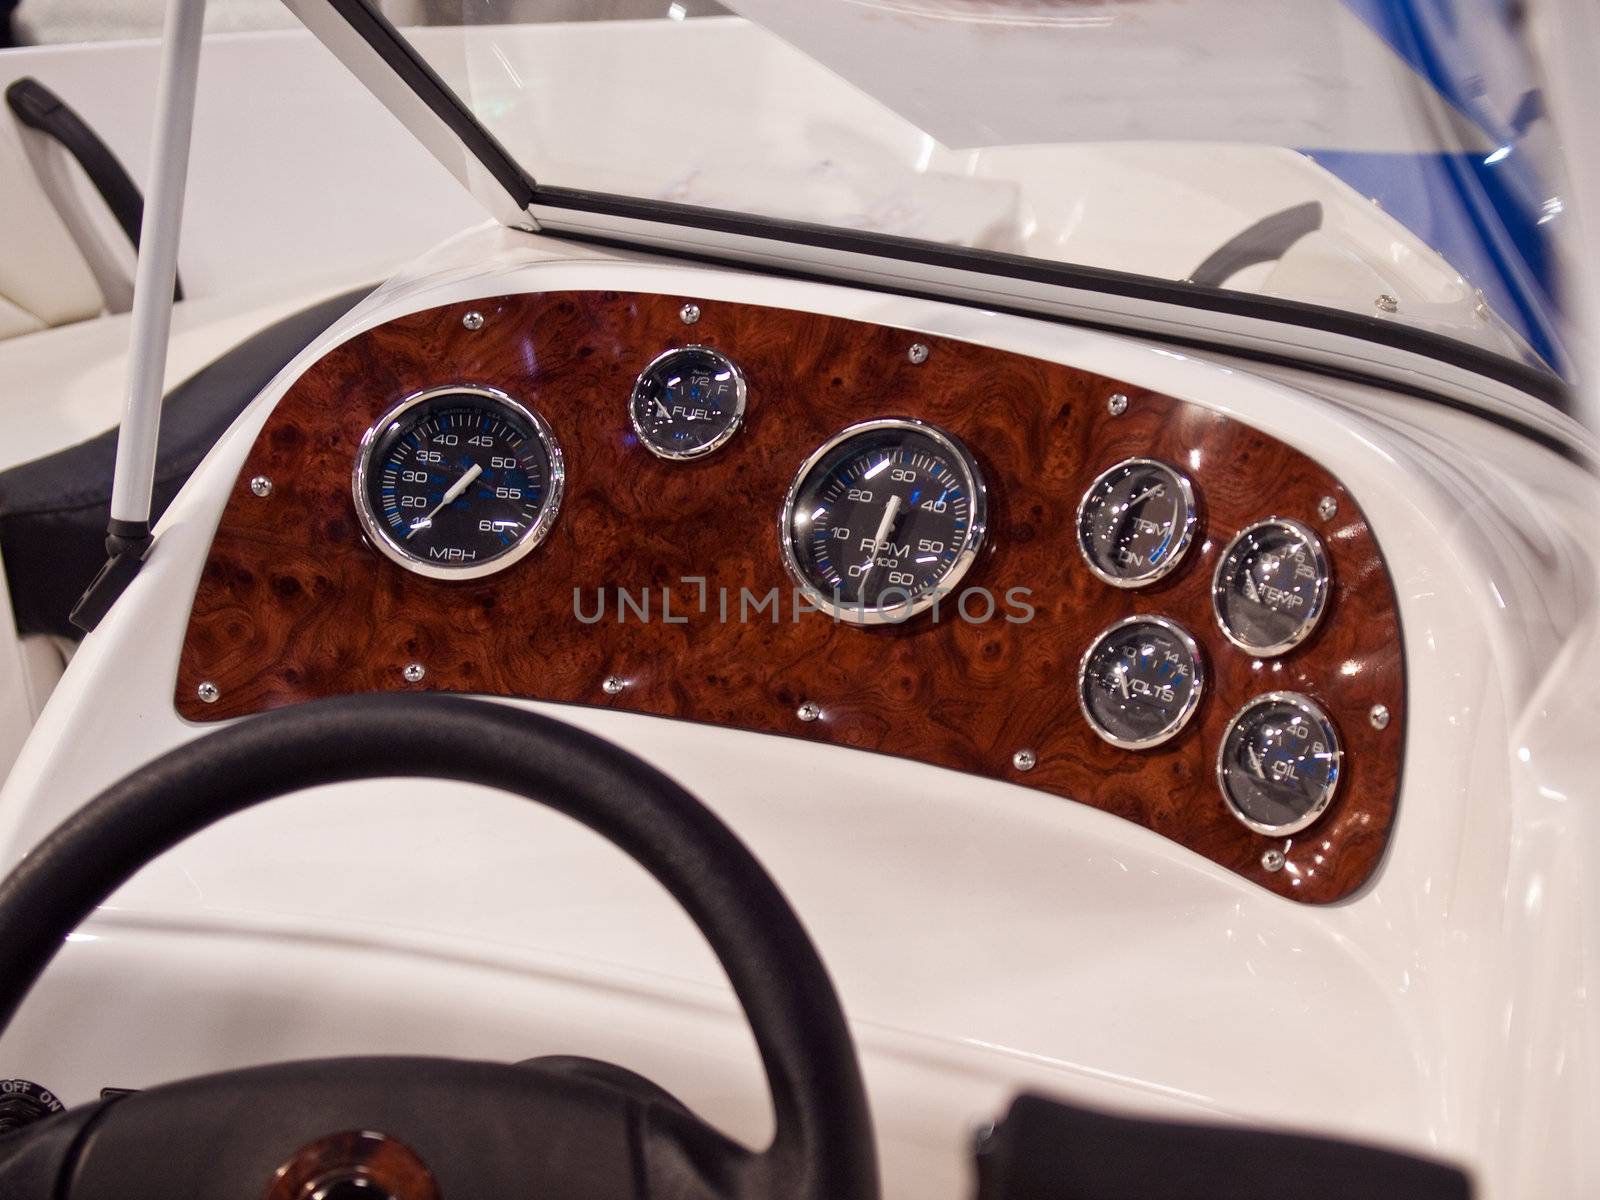 Details of dashboard instruments panel of a speedboat